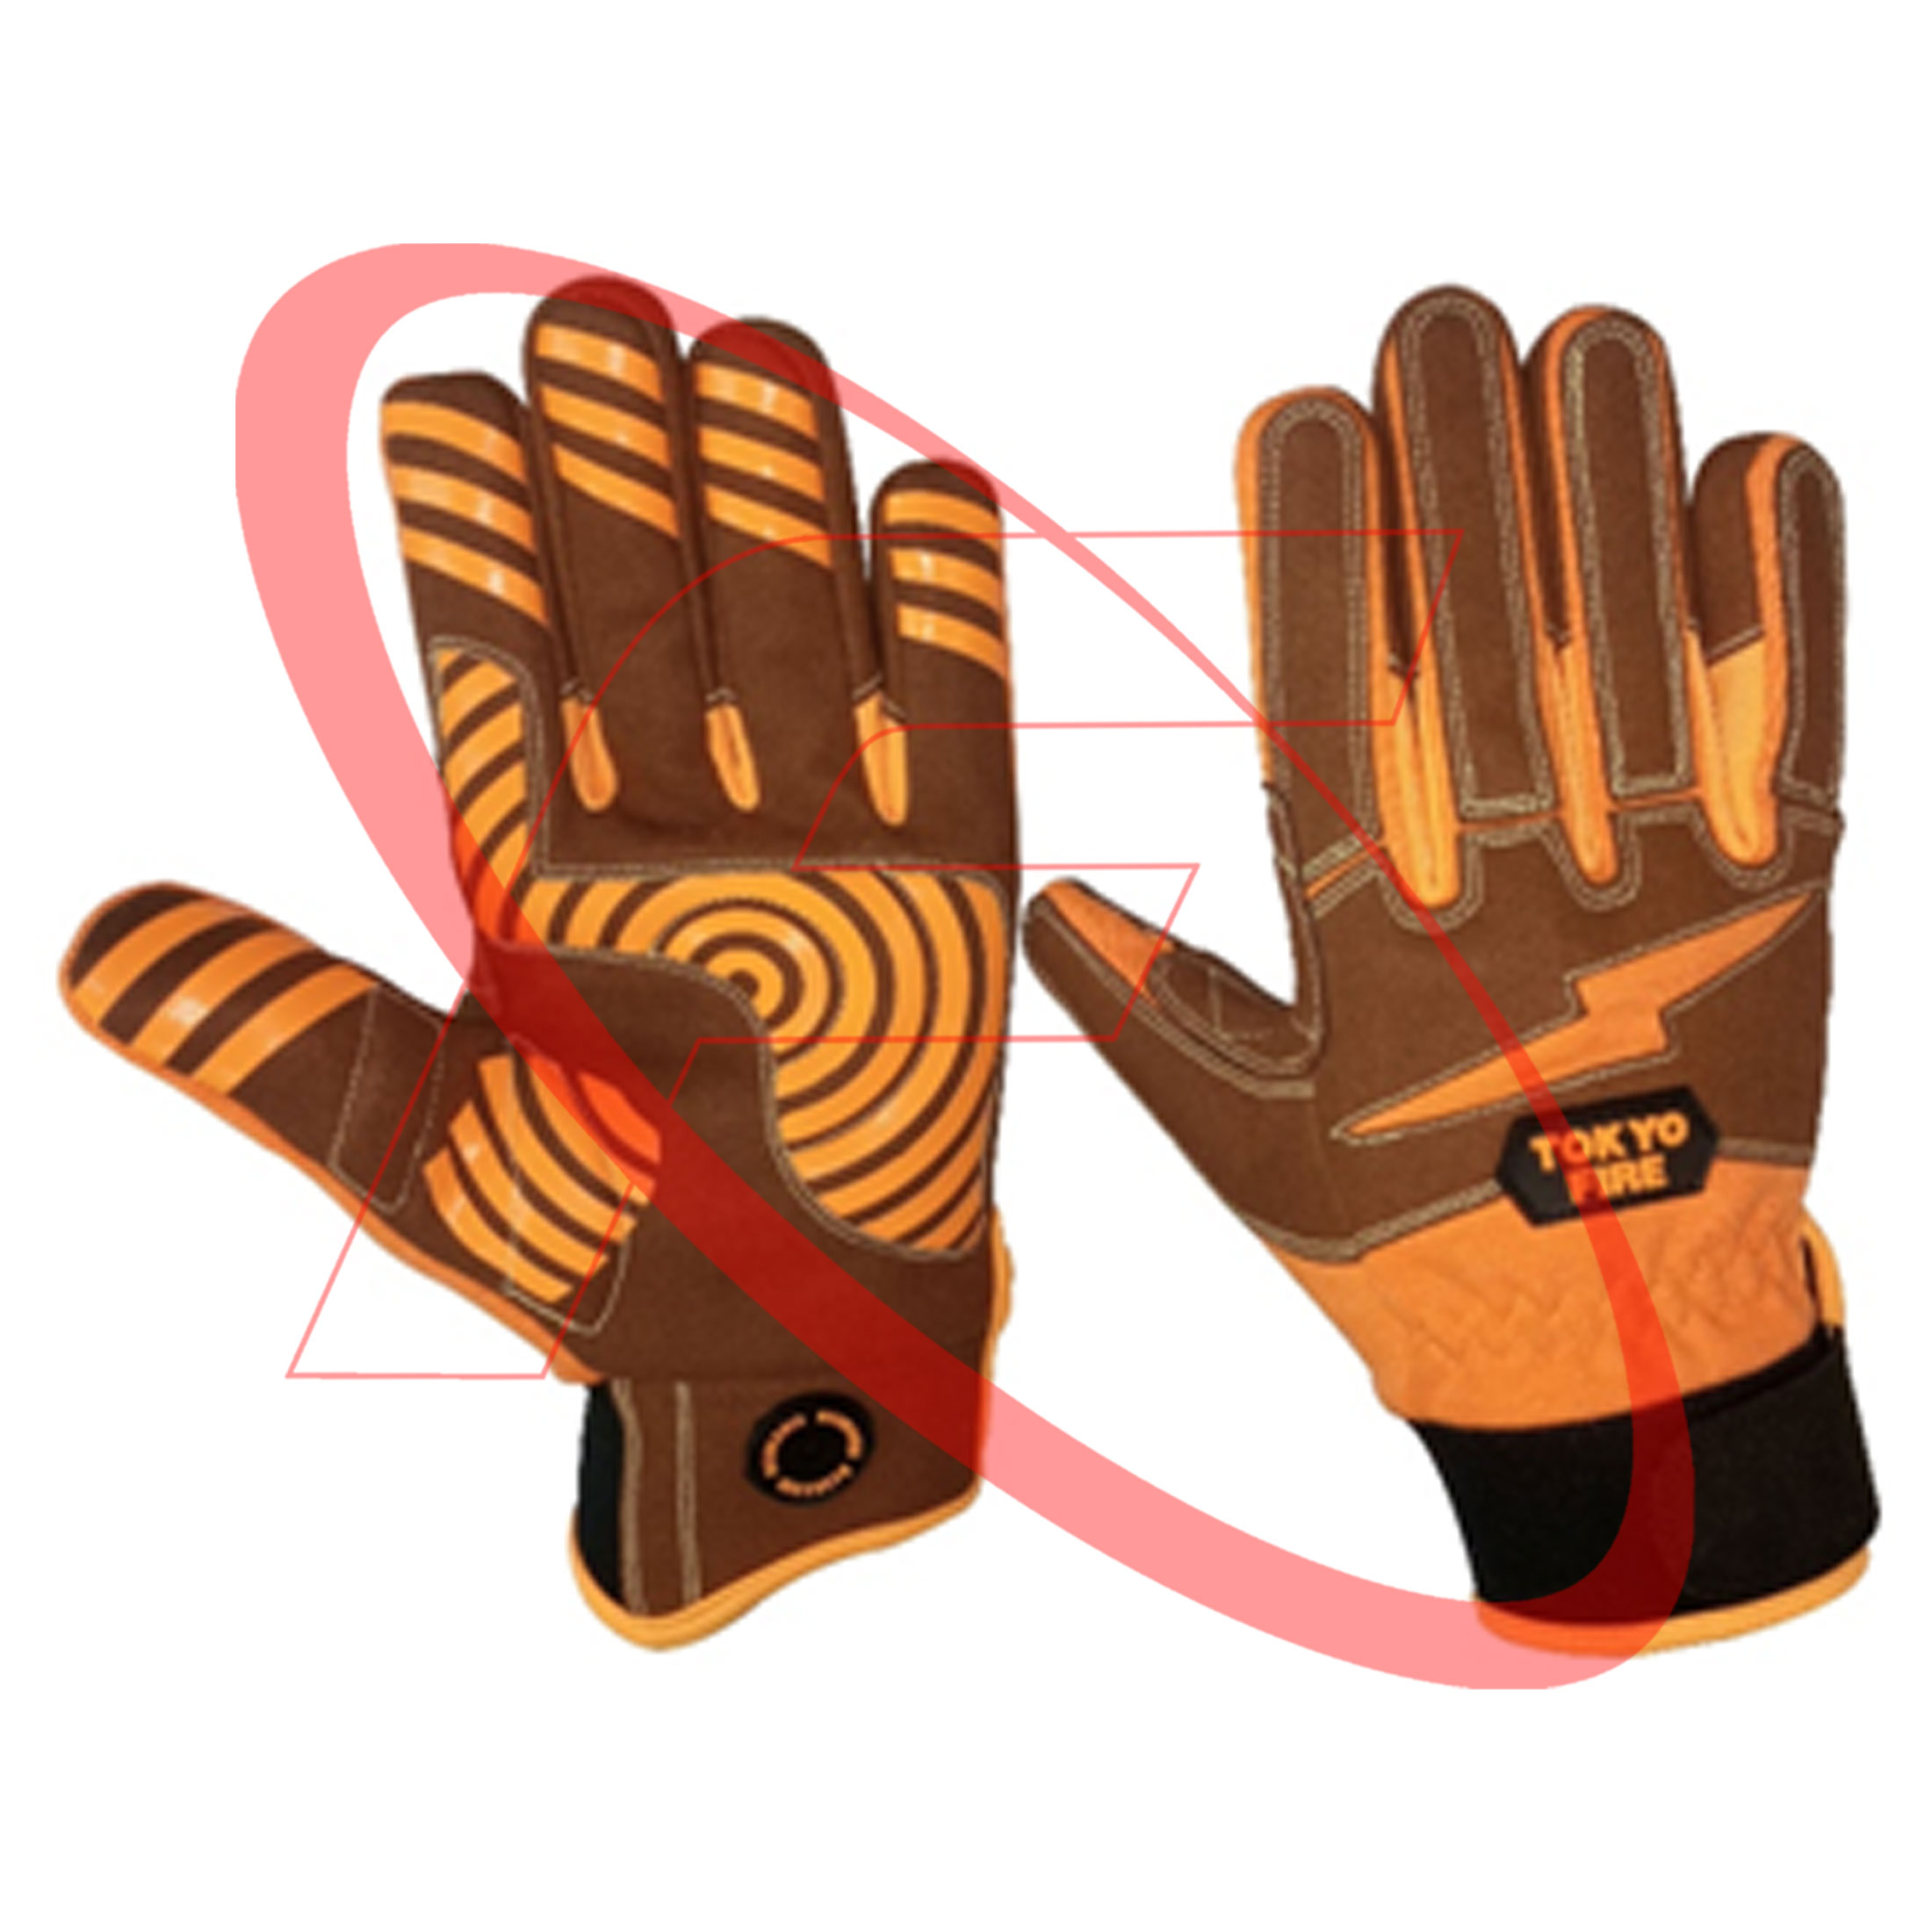 Mechanic Gloves for Oil and Gas Industries in Goat Leather Palm Leather Mechanic Gloves